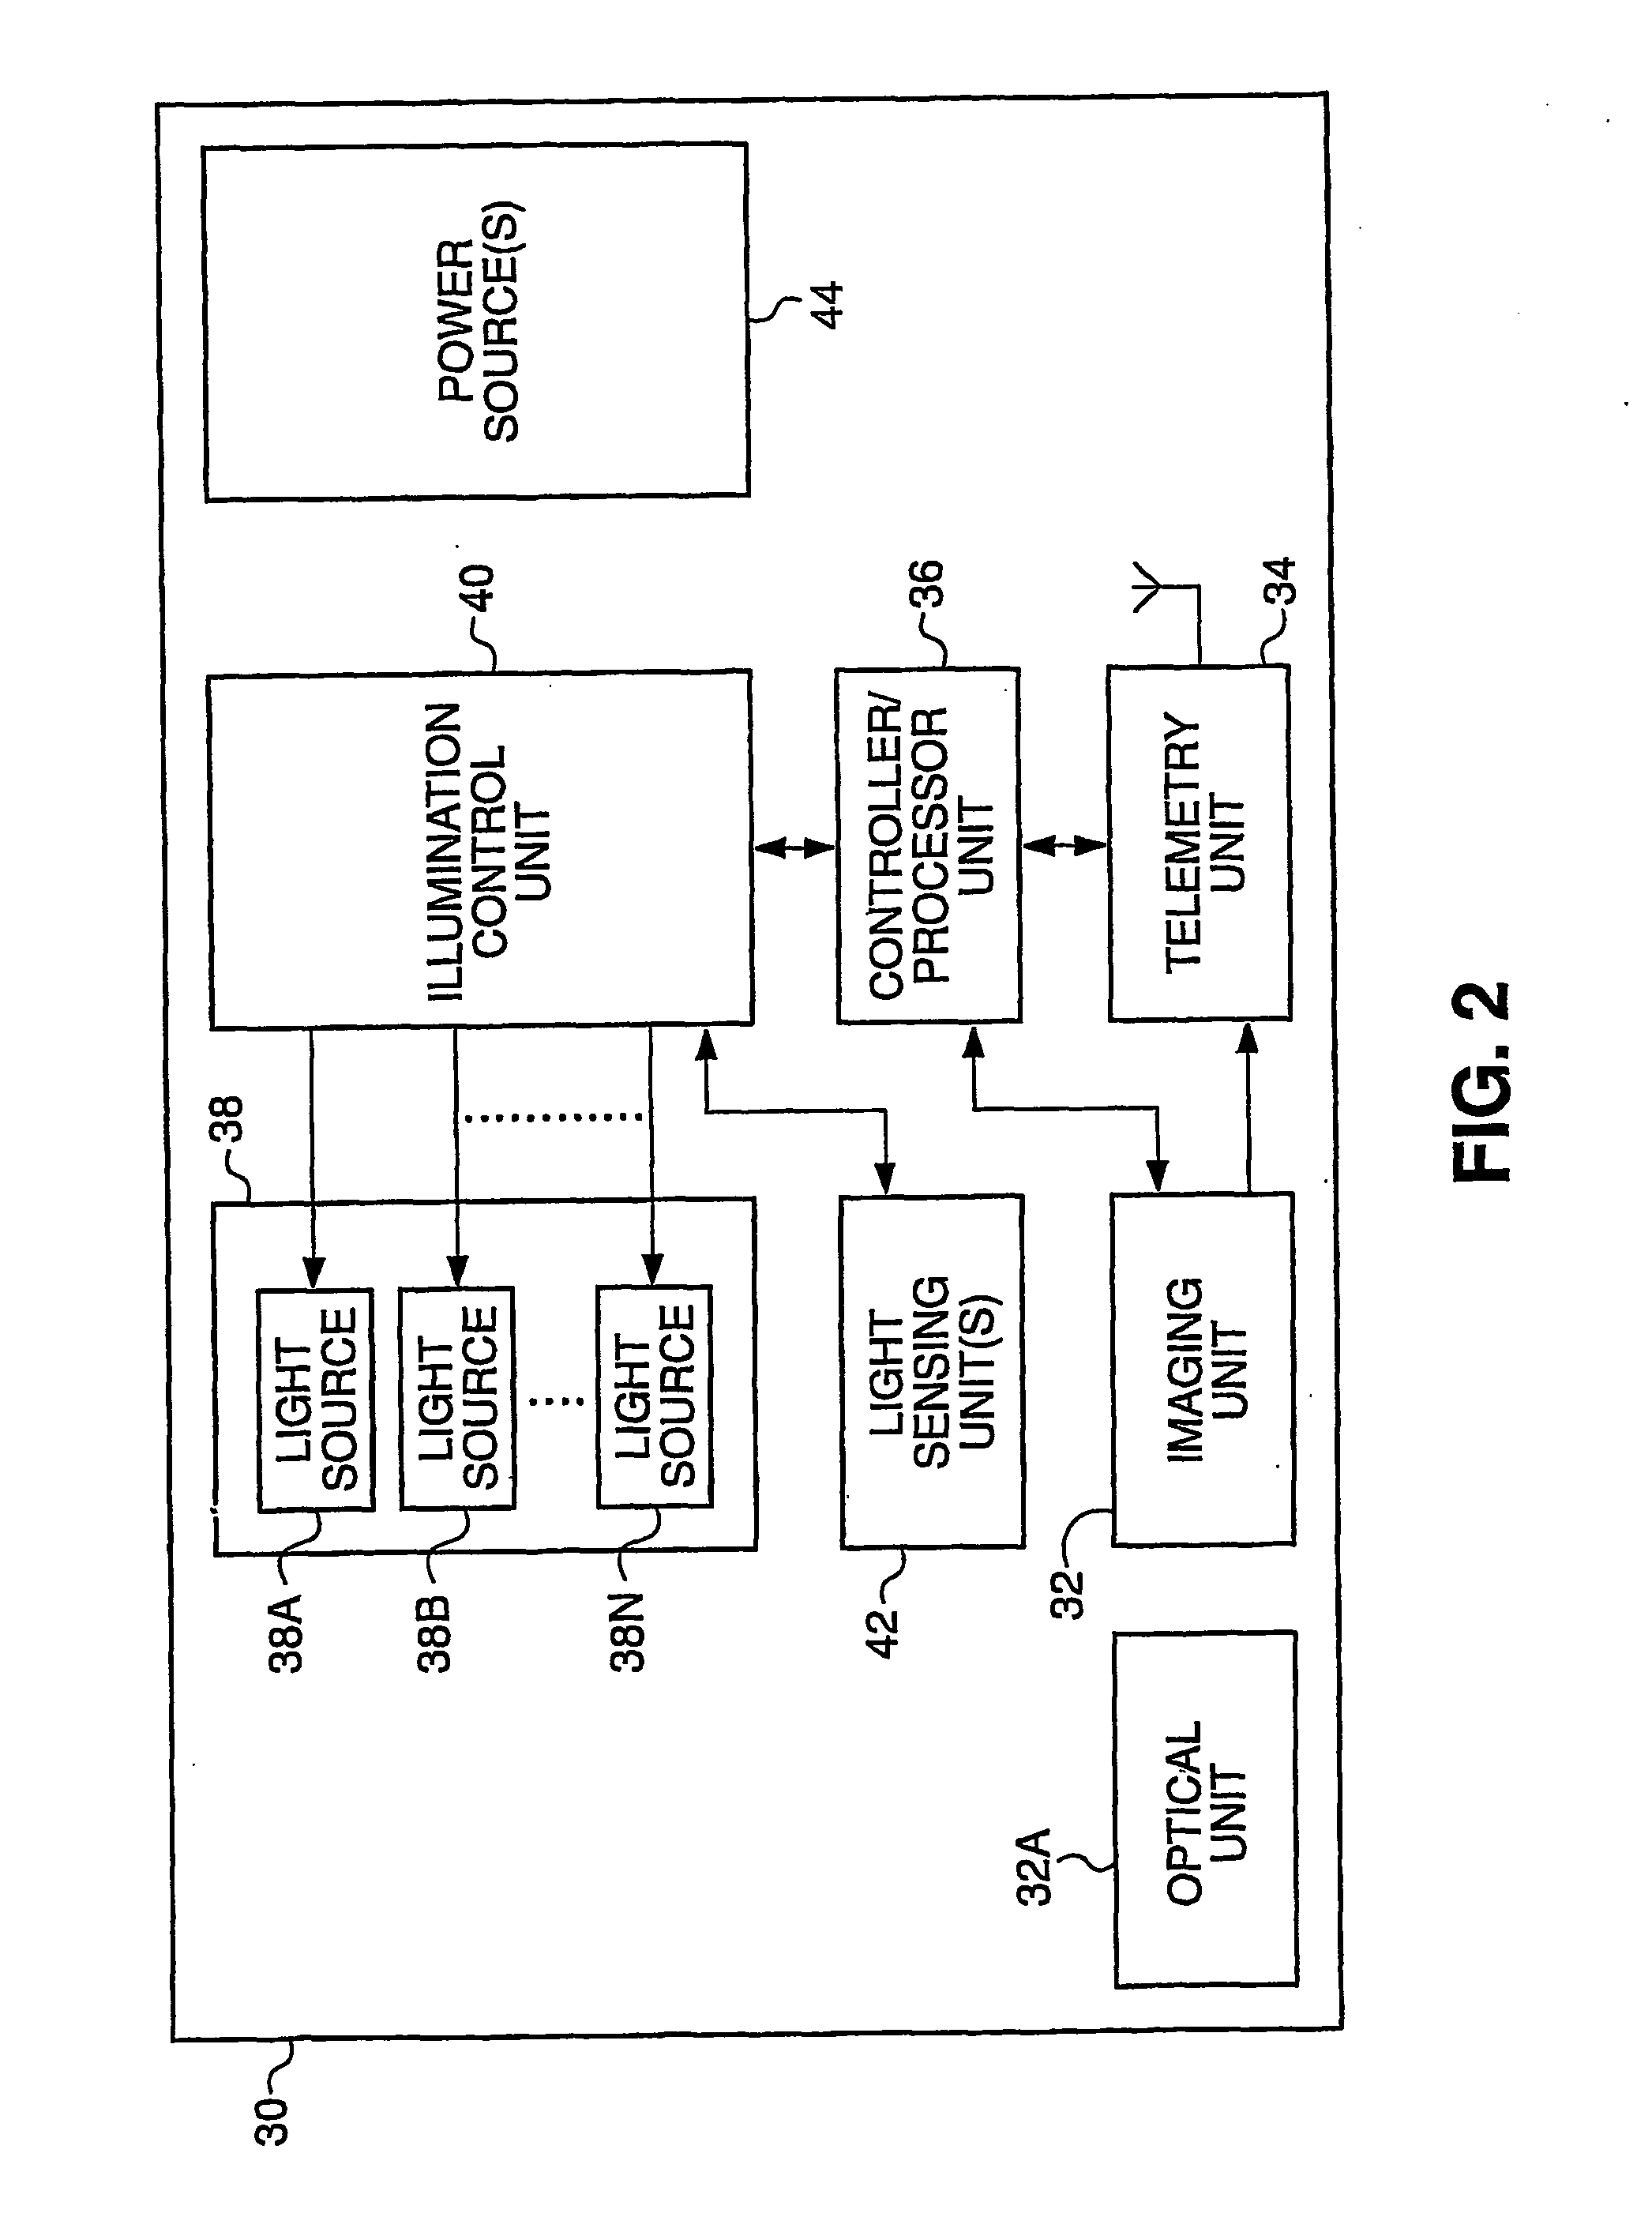 Apparatus and Method for Light Control in an in-Vivo Imaging Device